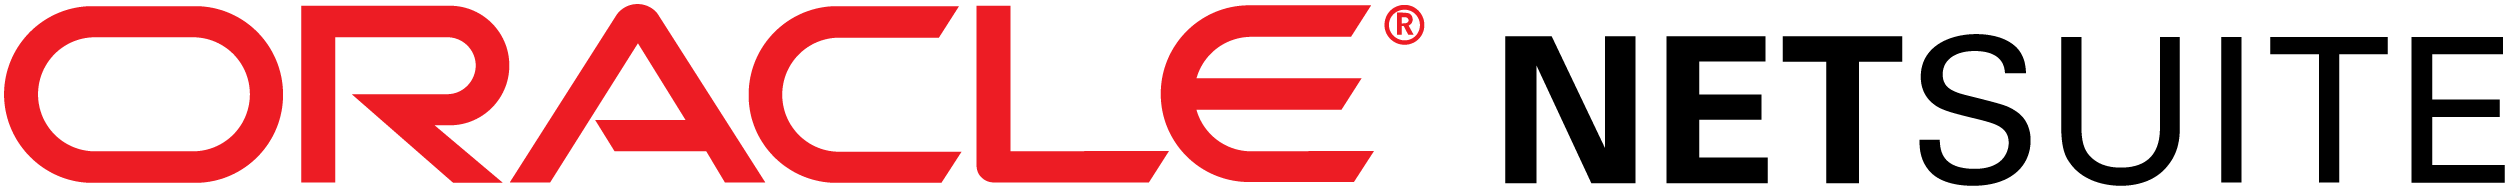 oracle-netsuite-logo for certifications